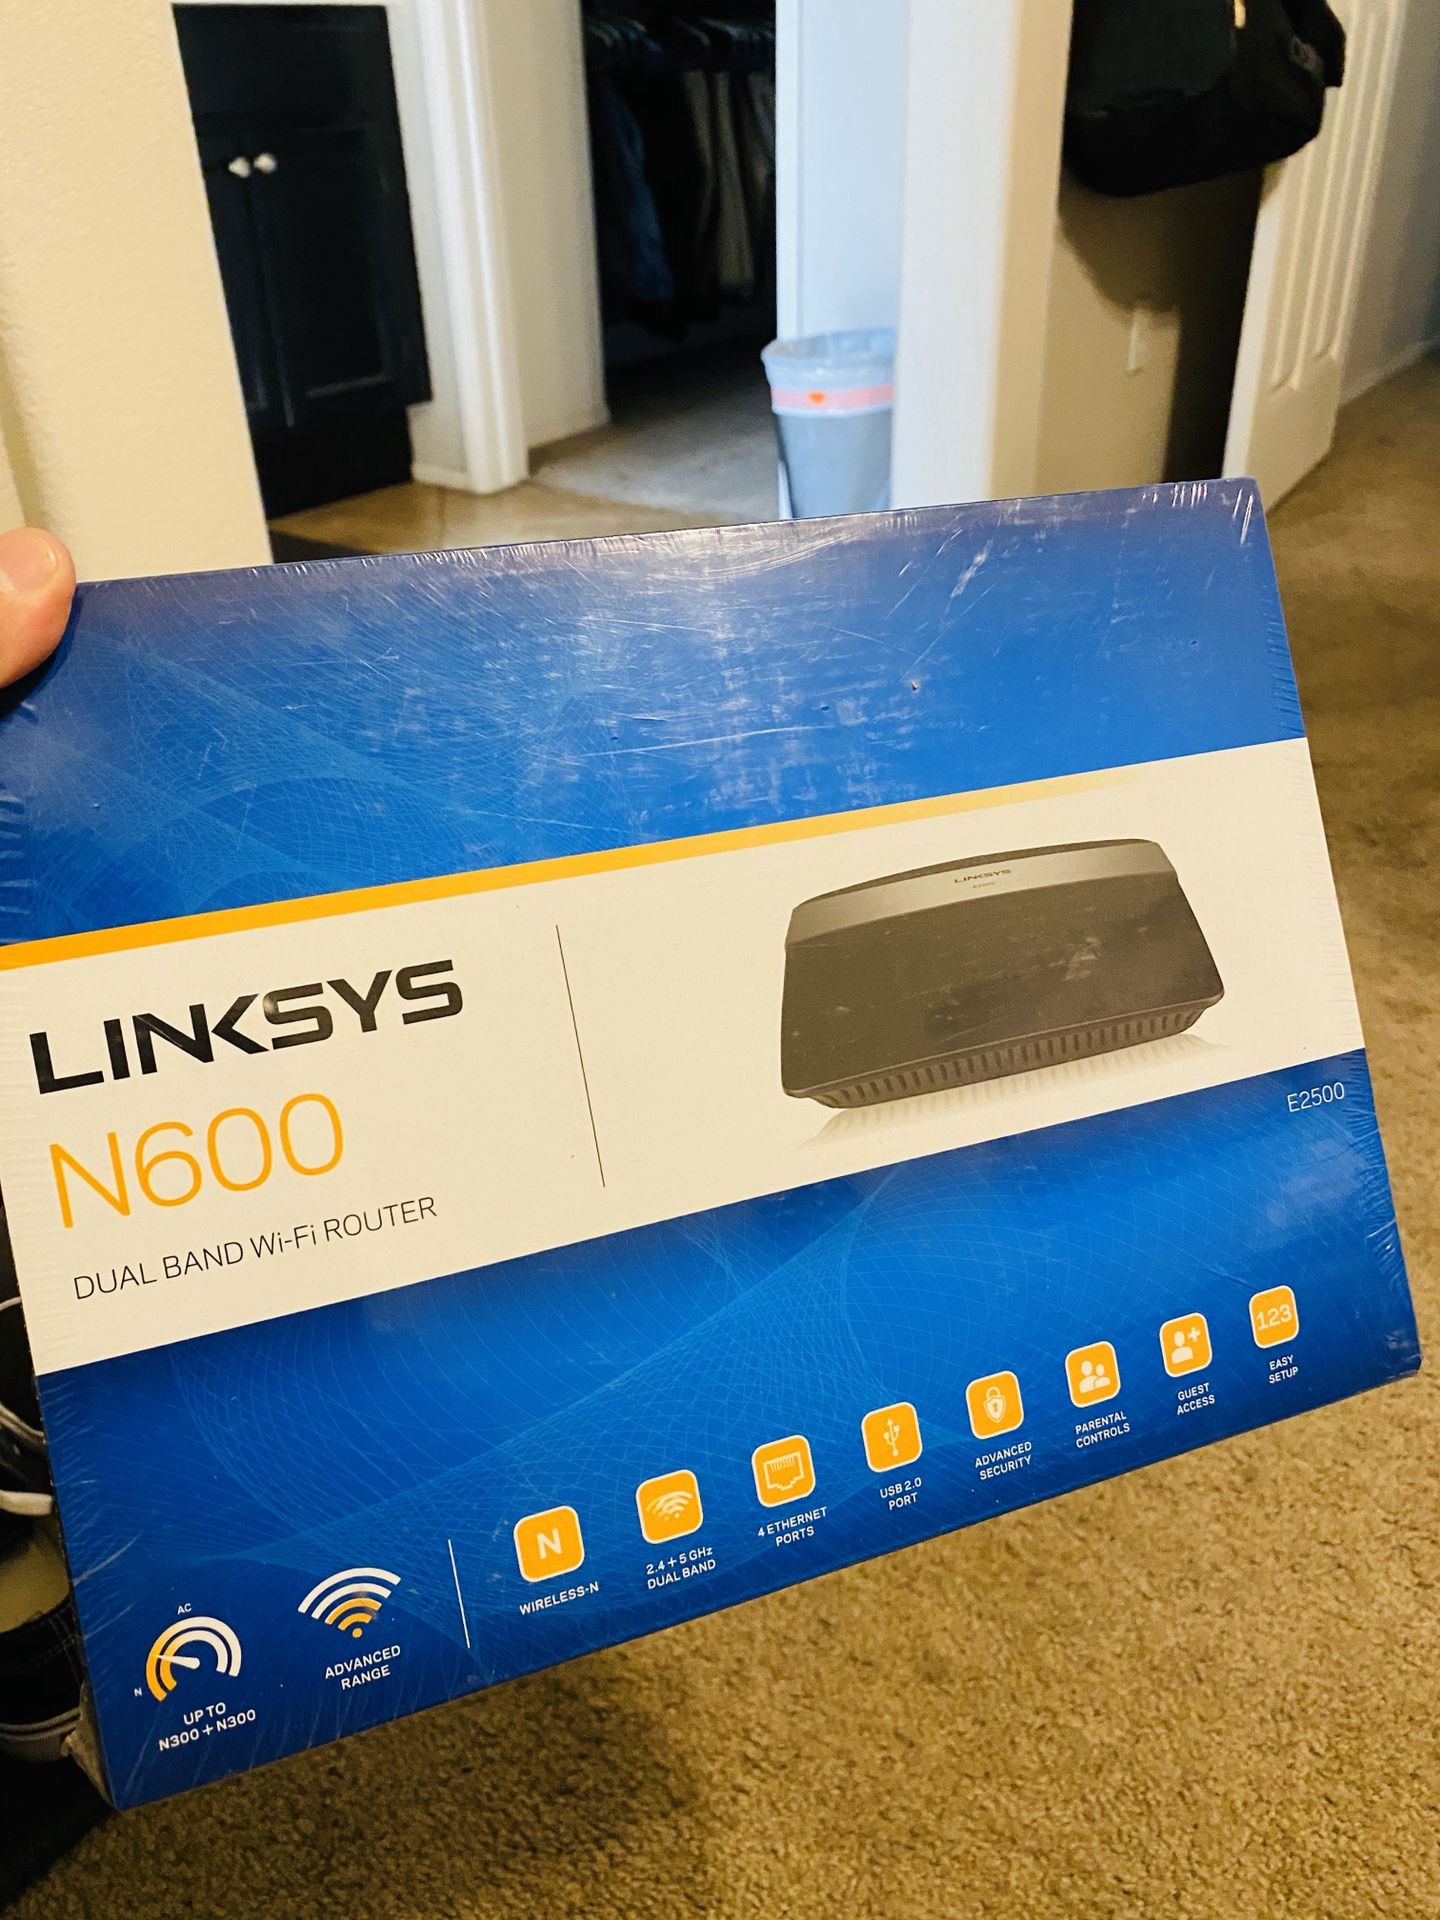 Linksys n600 WiFi router